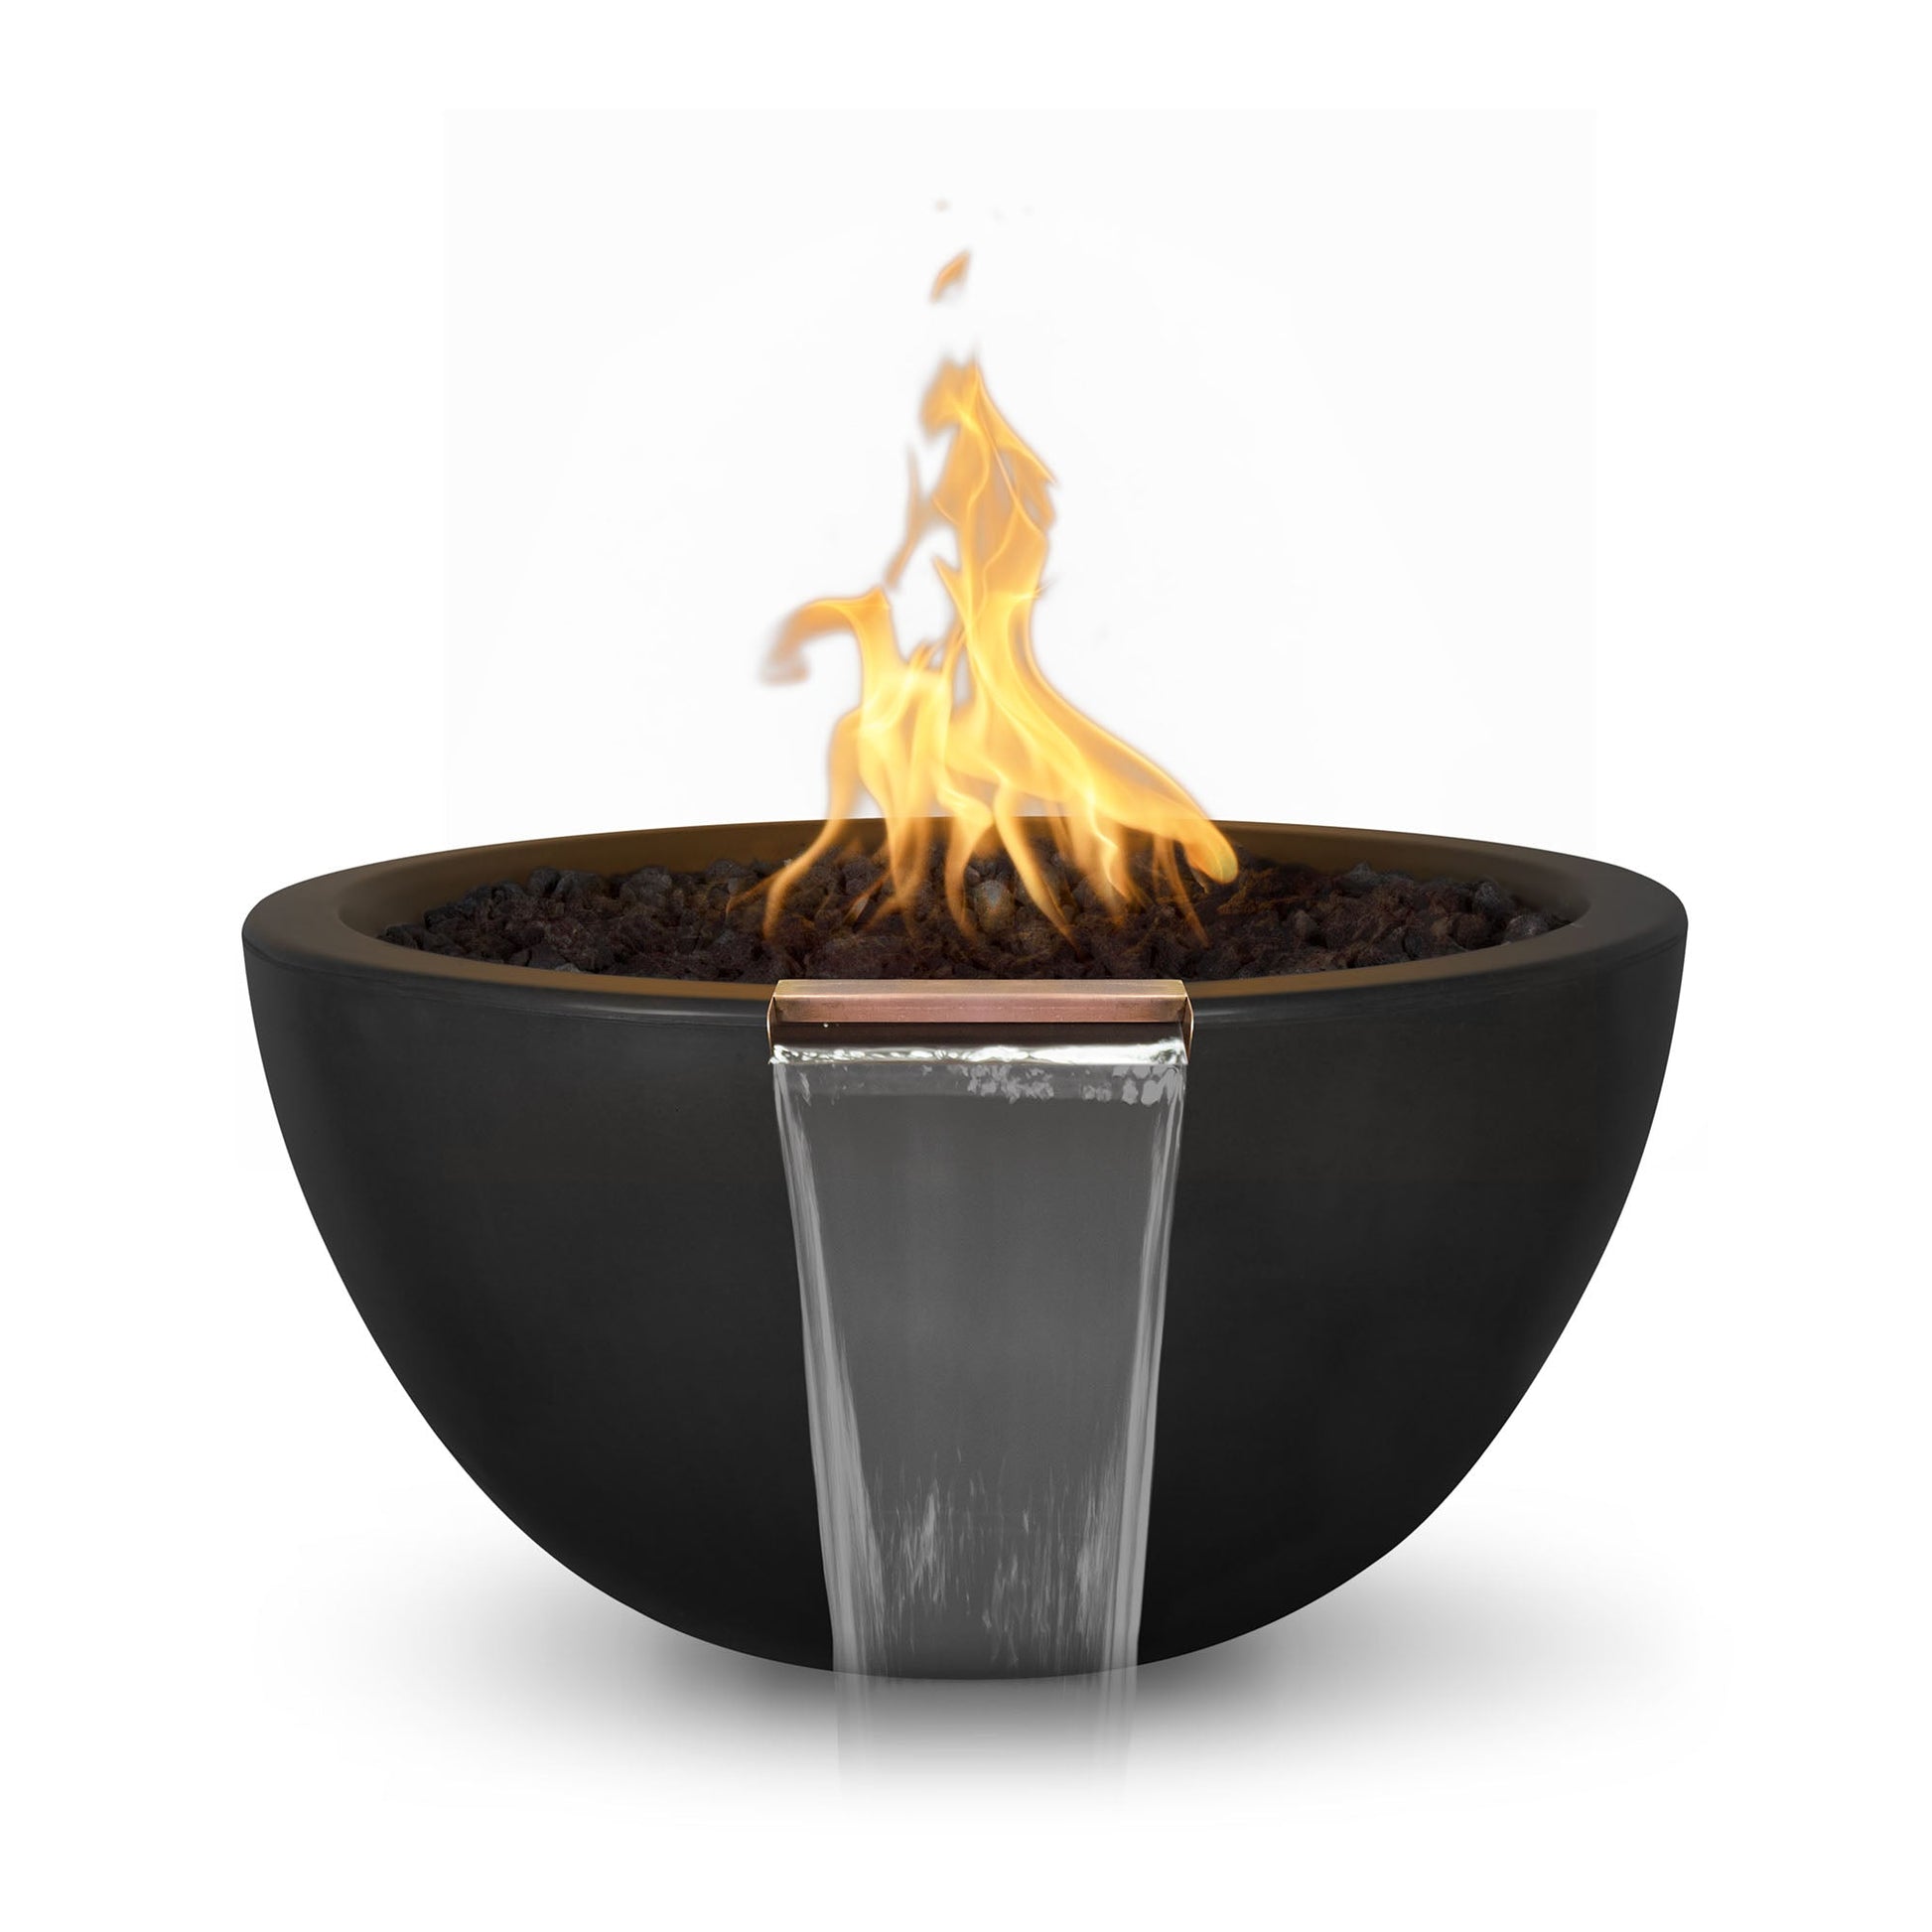 The Outdoor Plus Round Luna 38" Metallic Silver GFRC Concrete Liquid Propane Fire & Water Bowl with Match Lit with Flame Sense Ignition